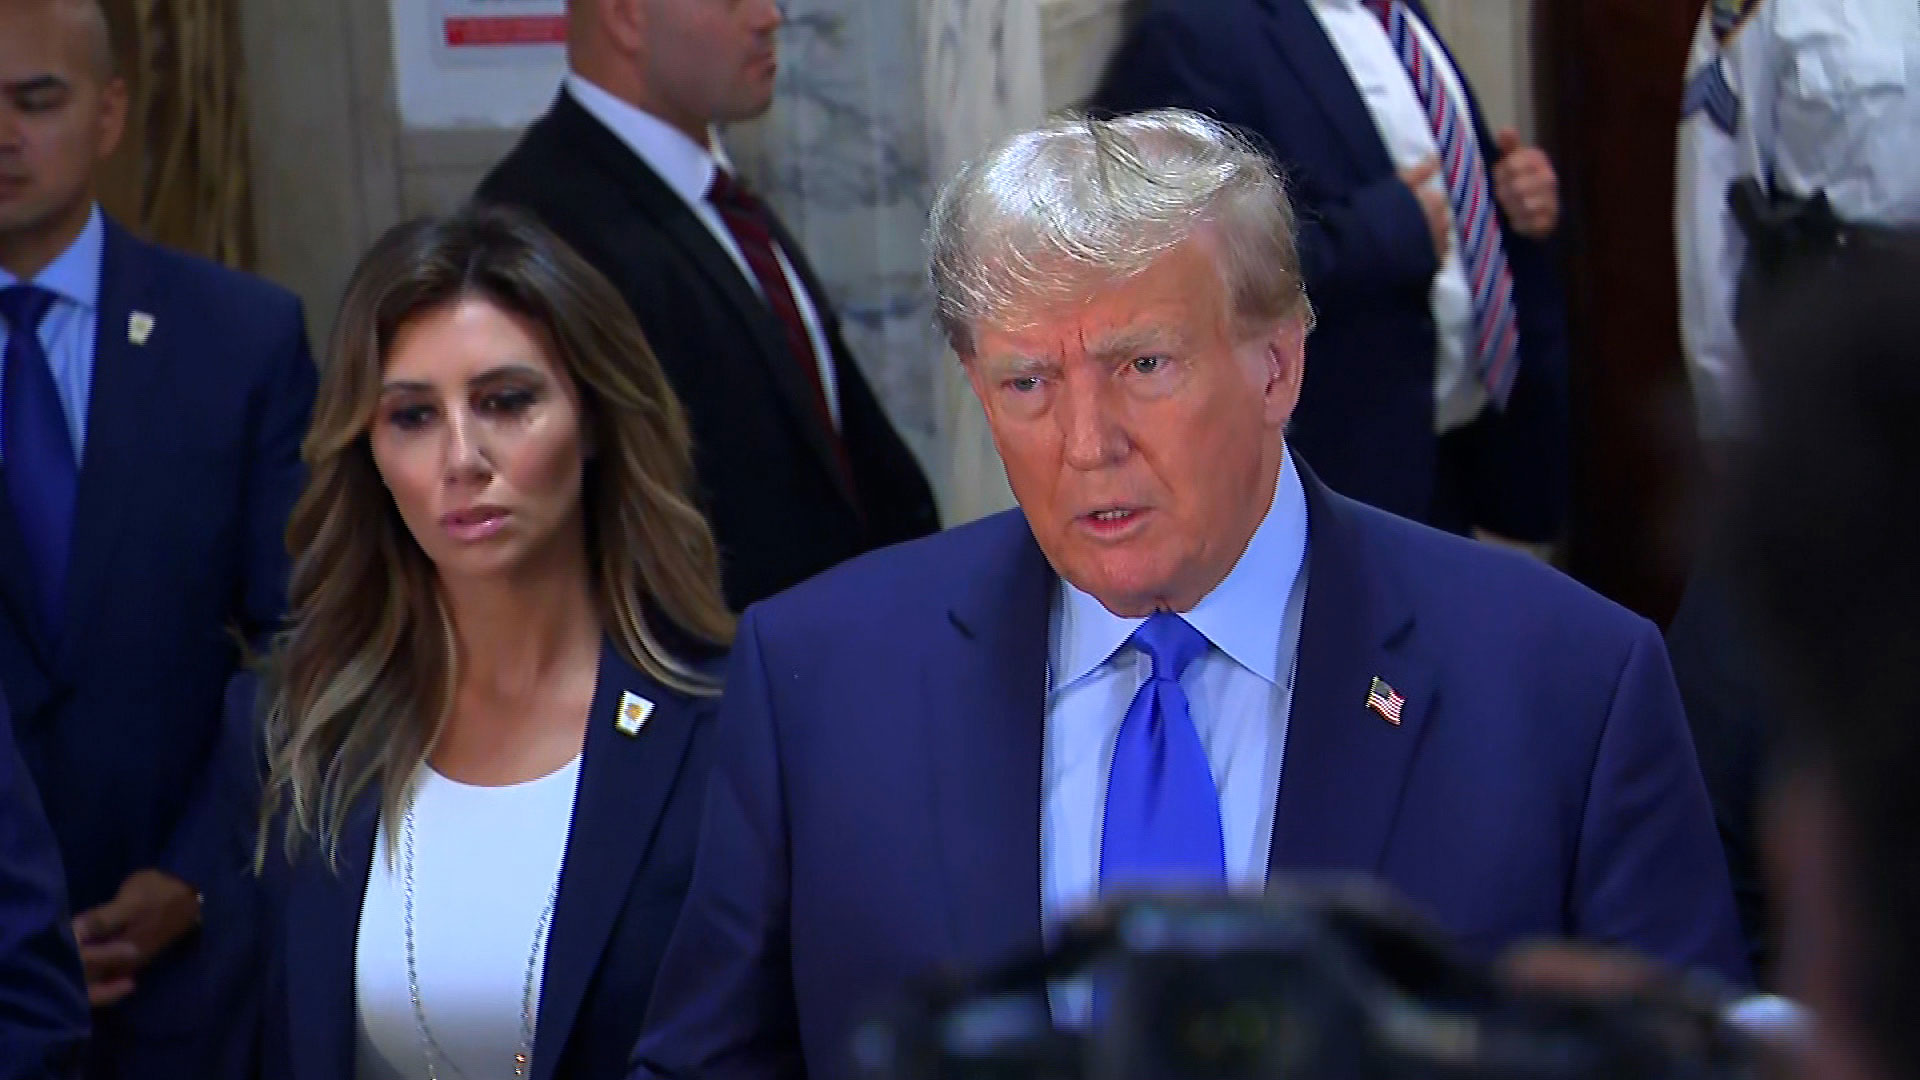 Former President Donald Trump speaks to the press inside the courthouse ahead of his civil fraud trial on Monday in New York.